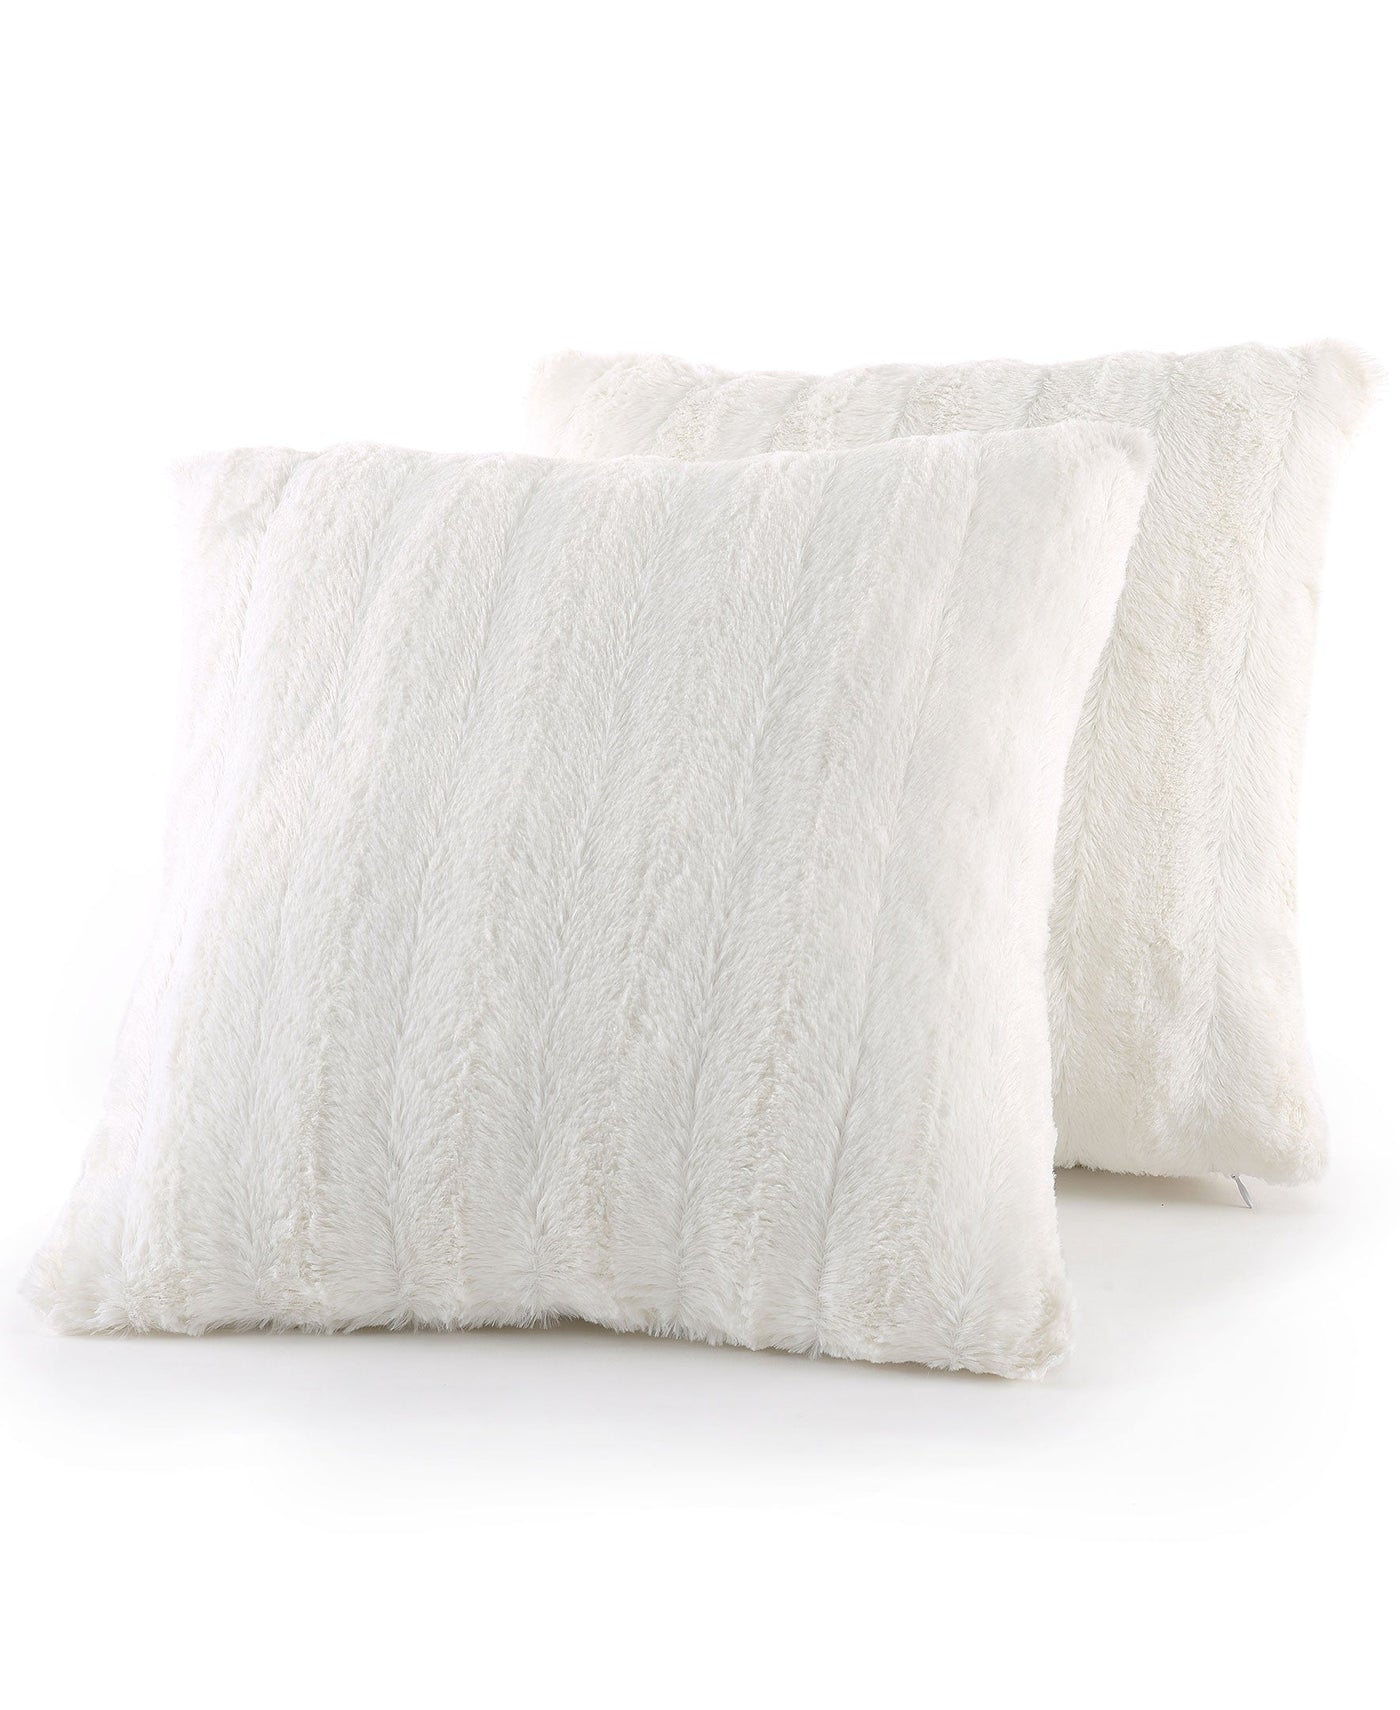 Cheer Collection Faux Fur Pillows - Decorative Round Throw Pillows for  Couch & Bed - Machine Washable - 18 - White (Set of 2)